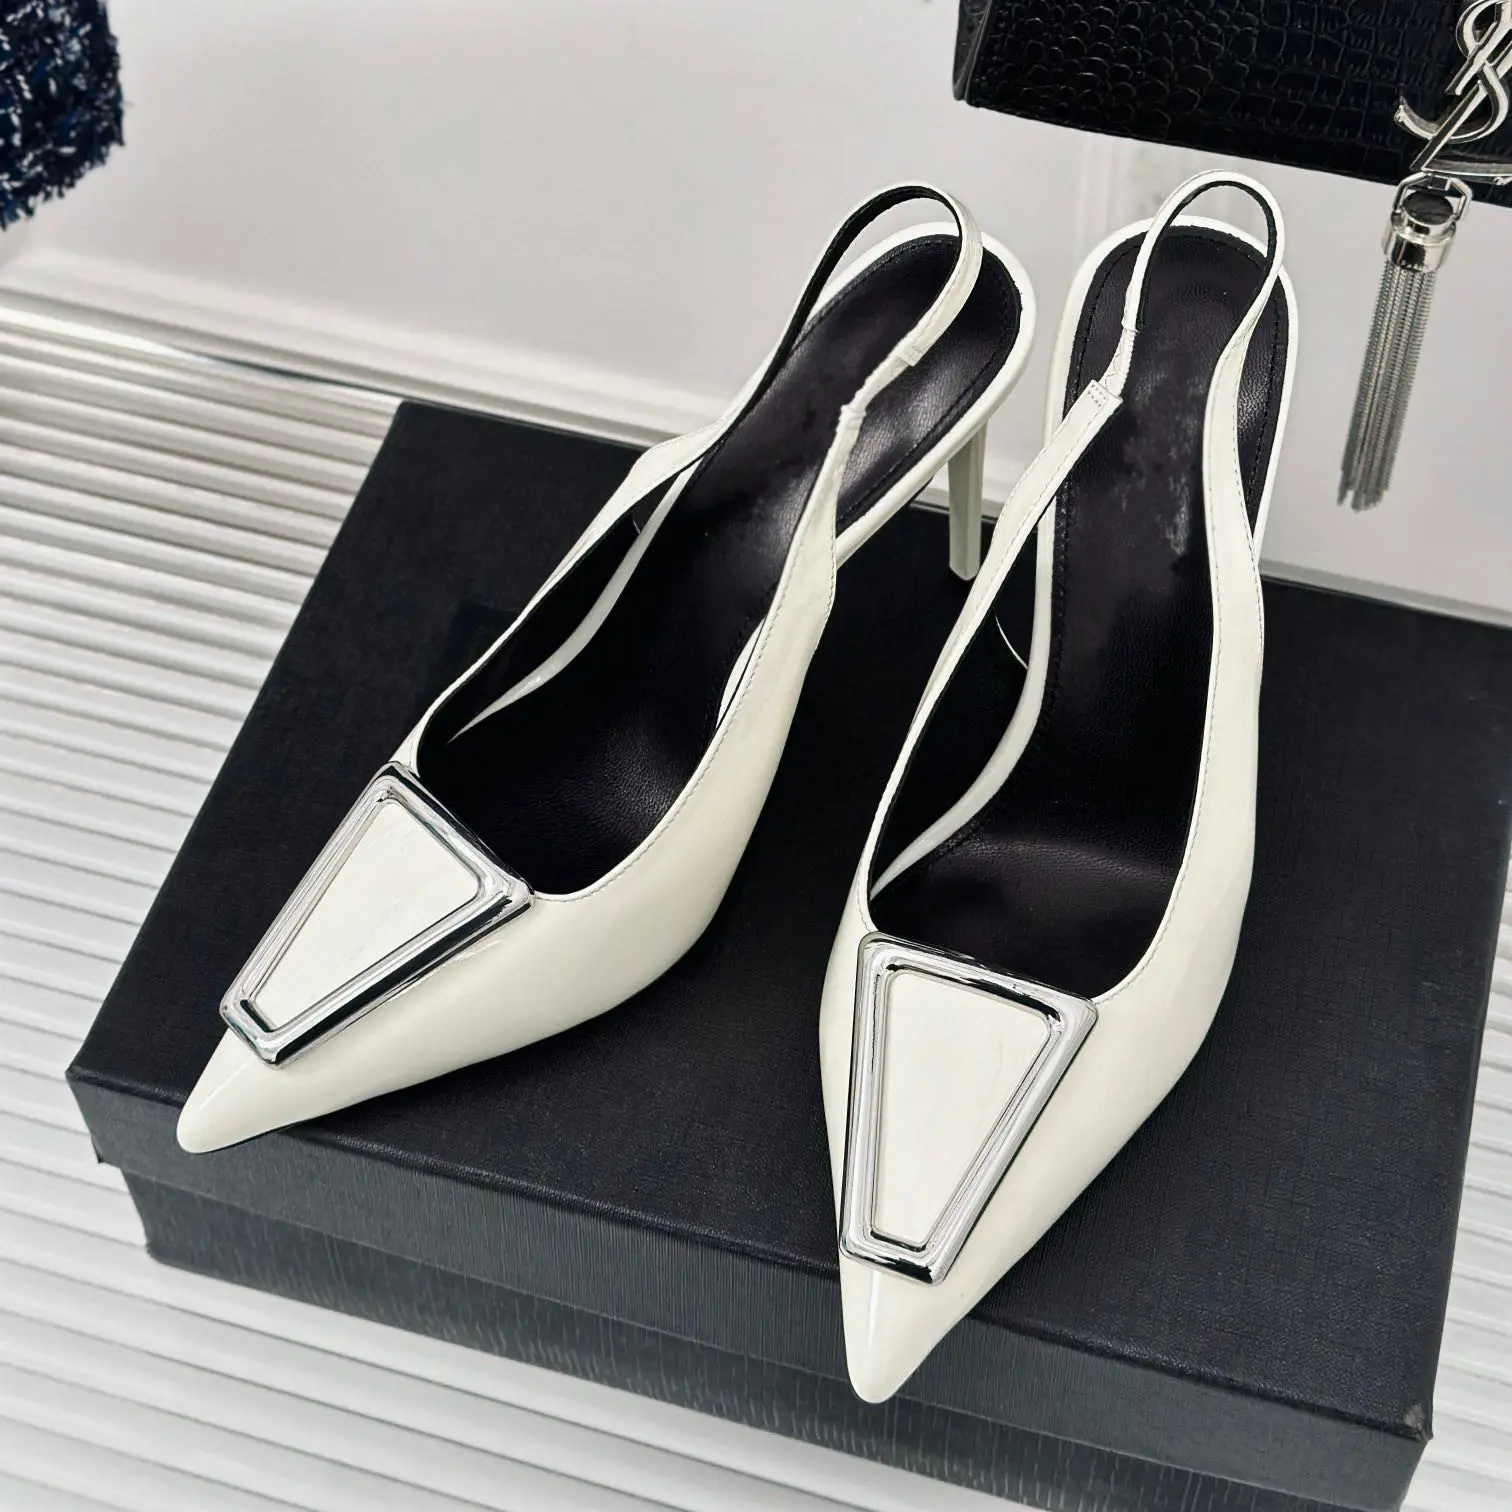 women genuine leather sandals square toe supe high heel sandals thick heels buckle sandals ladies summer shoes beige Casual Designer Fashion Women Shoes Sexy Lady White Patent Leather Strappy Pointy Toe High Heels Sandals Zapatos Mujer Sandals